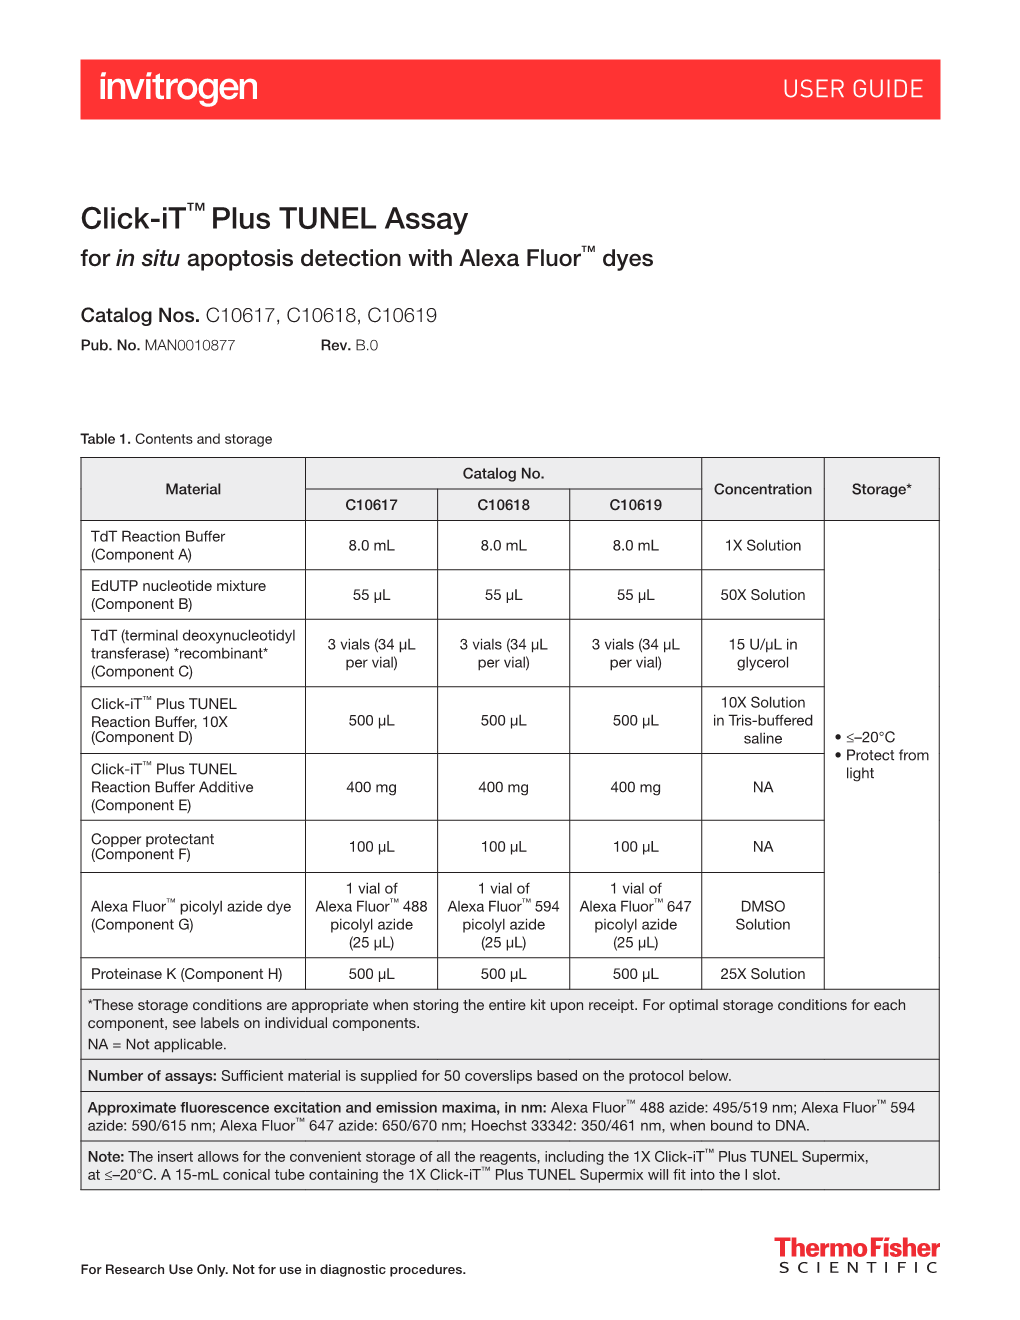 Click-It™ Plus TUNEL Assay for in Situ Apoptosis Detection with Alexa Fluor™ Dyes